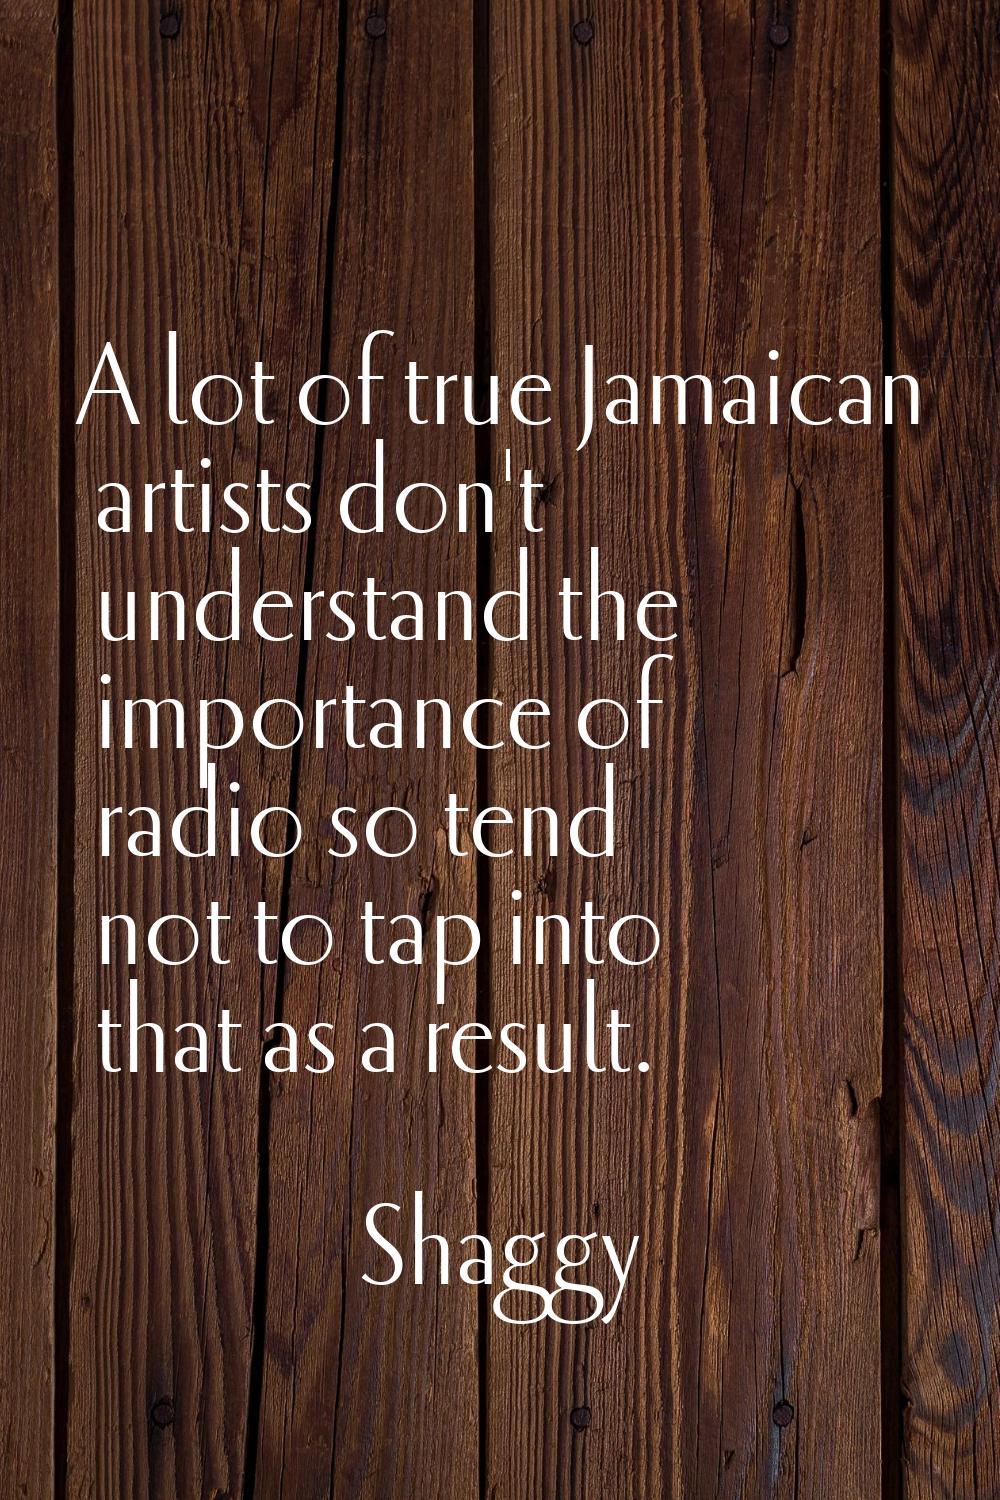 A lot of true Jamaican artists don't understand the importance of radio so tend not to tap into tha